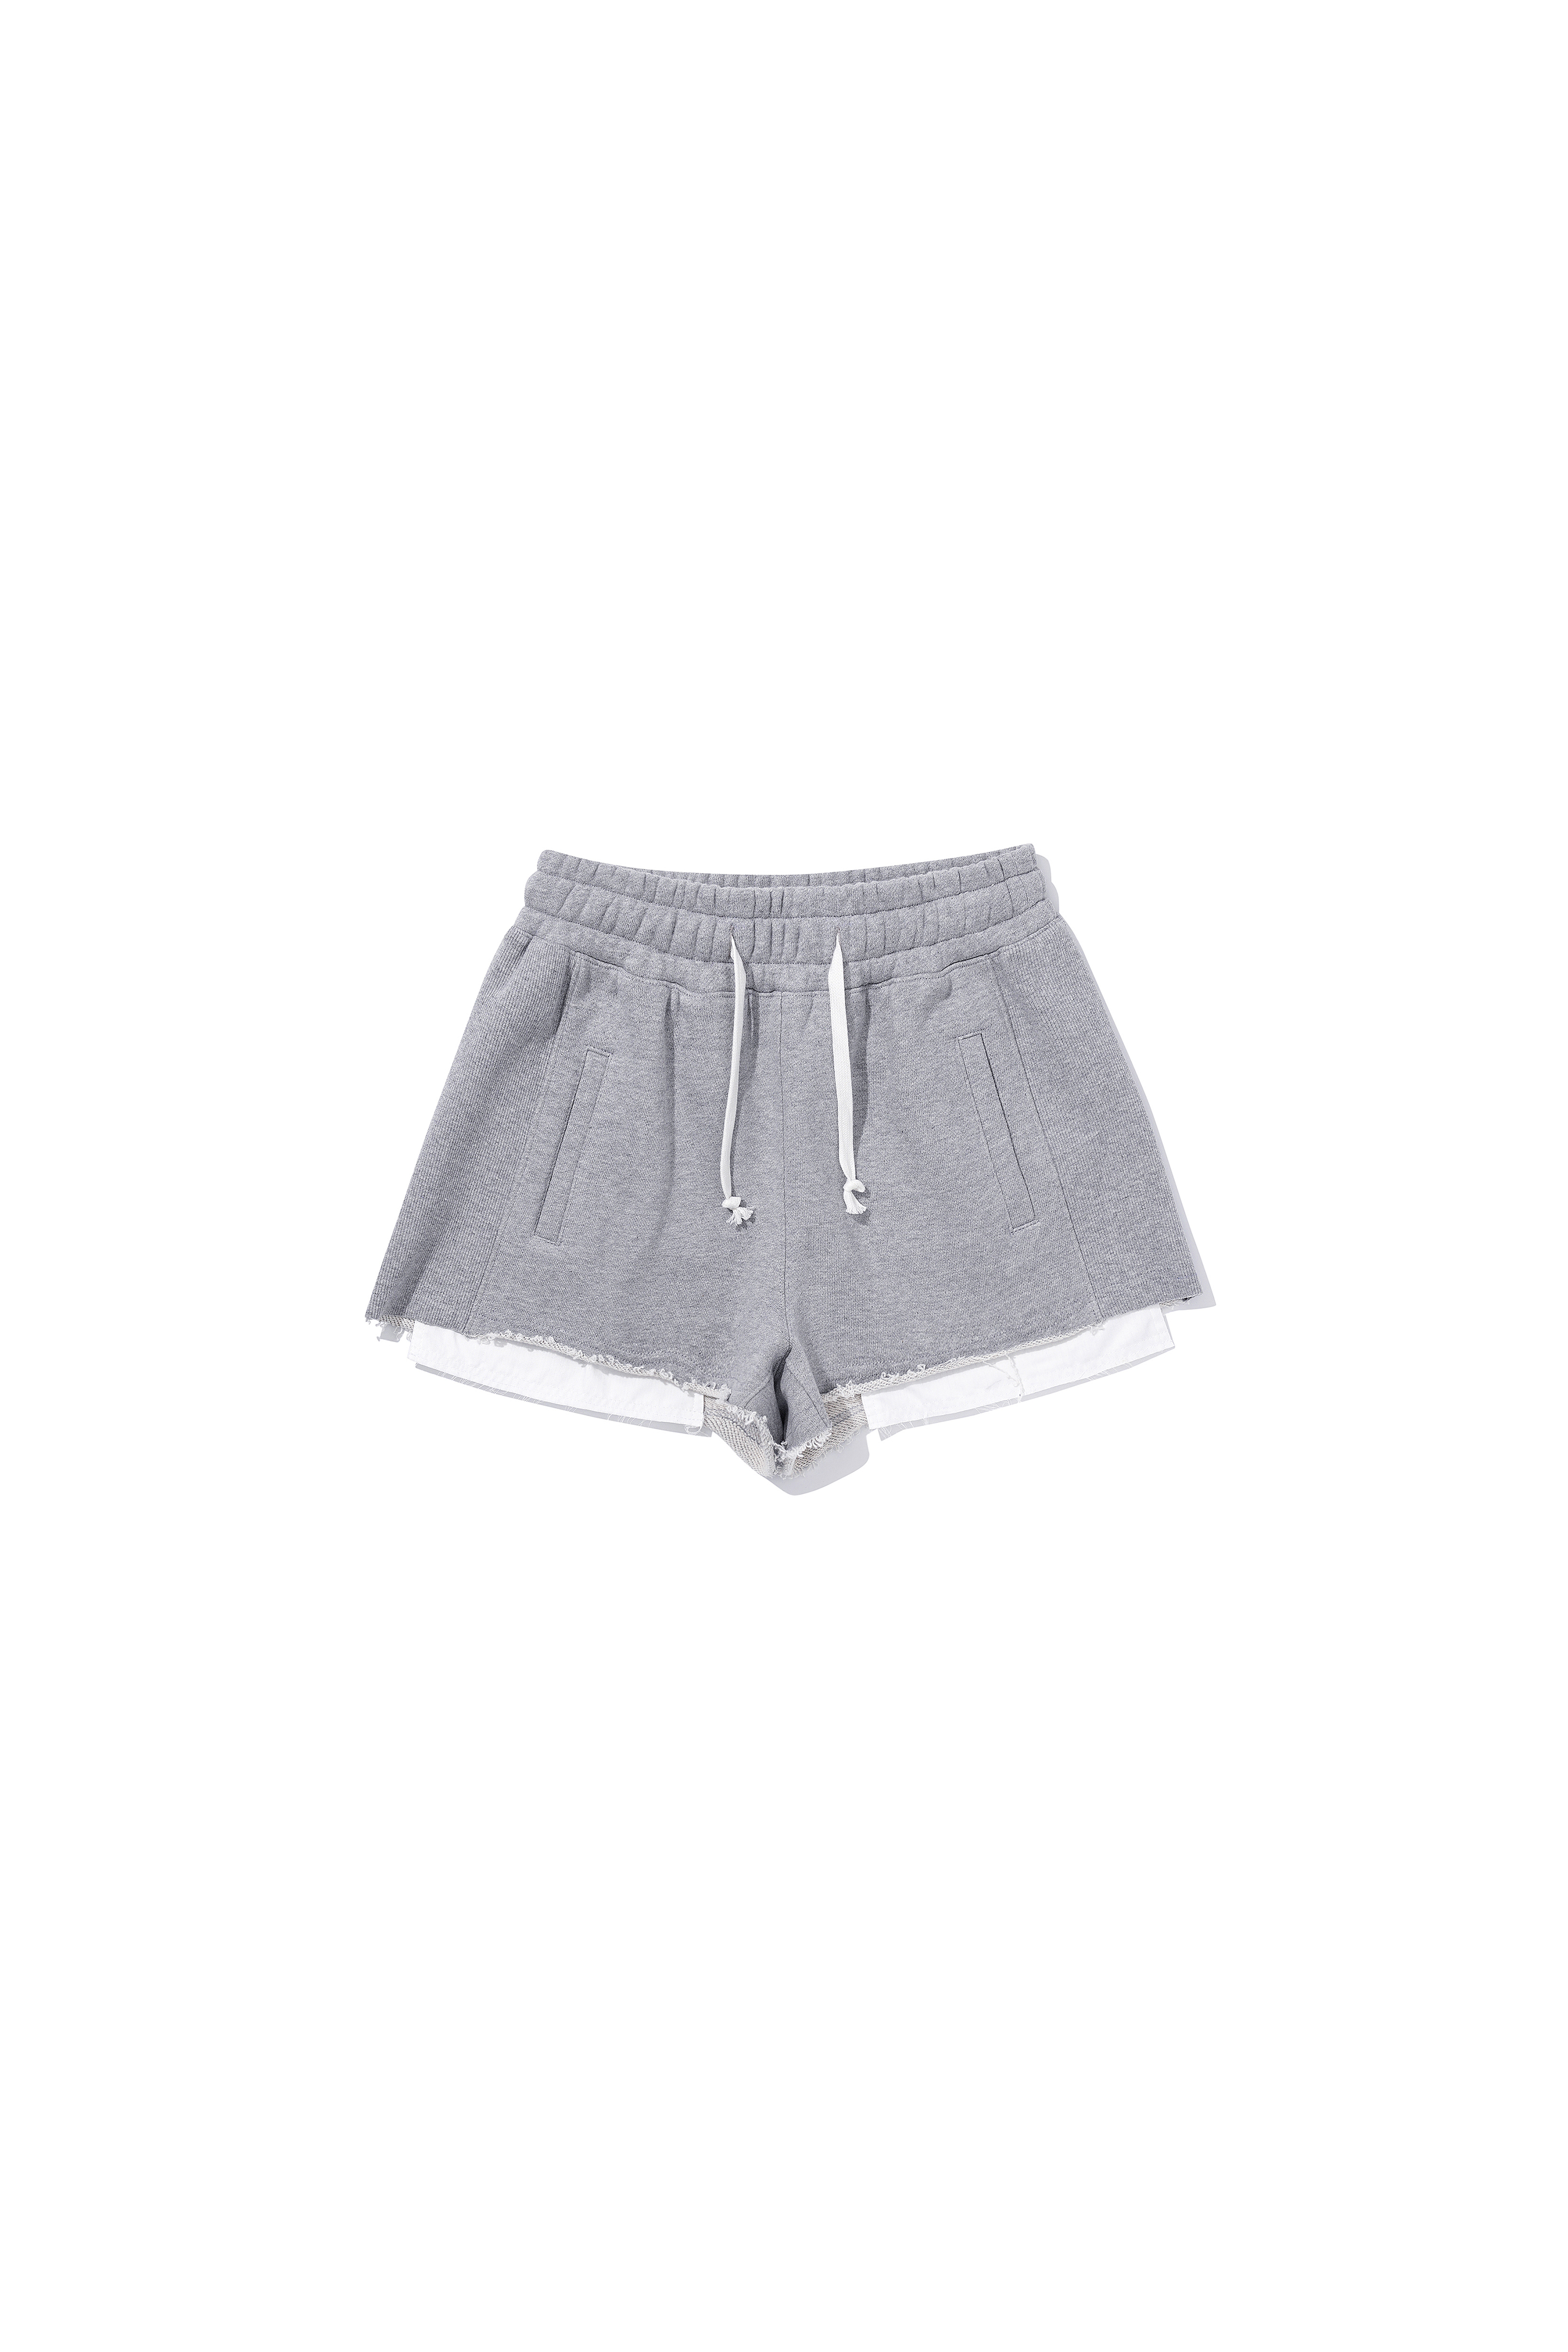 DAY-OFF 006 Cotton Shorts M.Grey